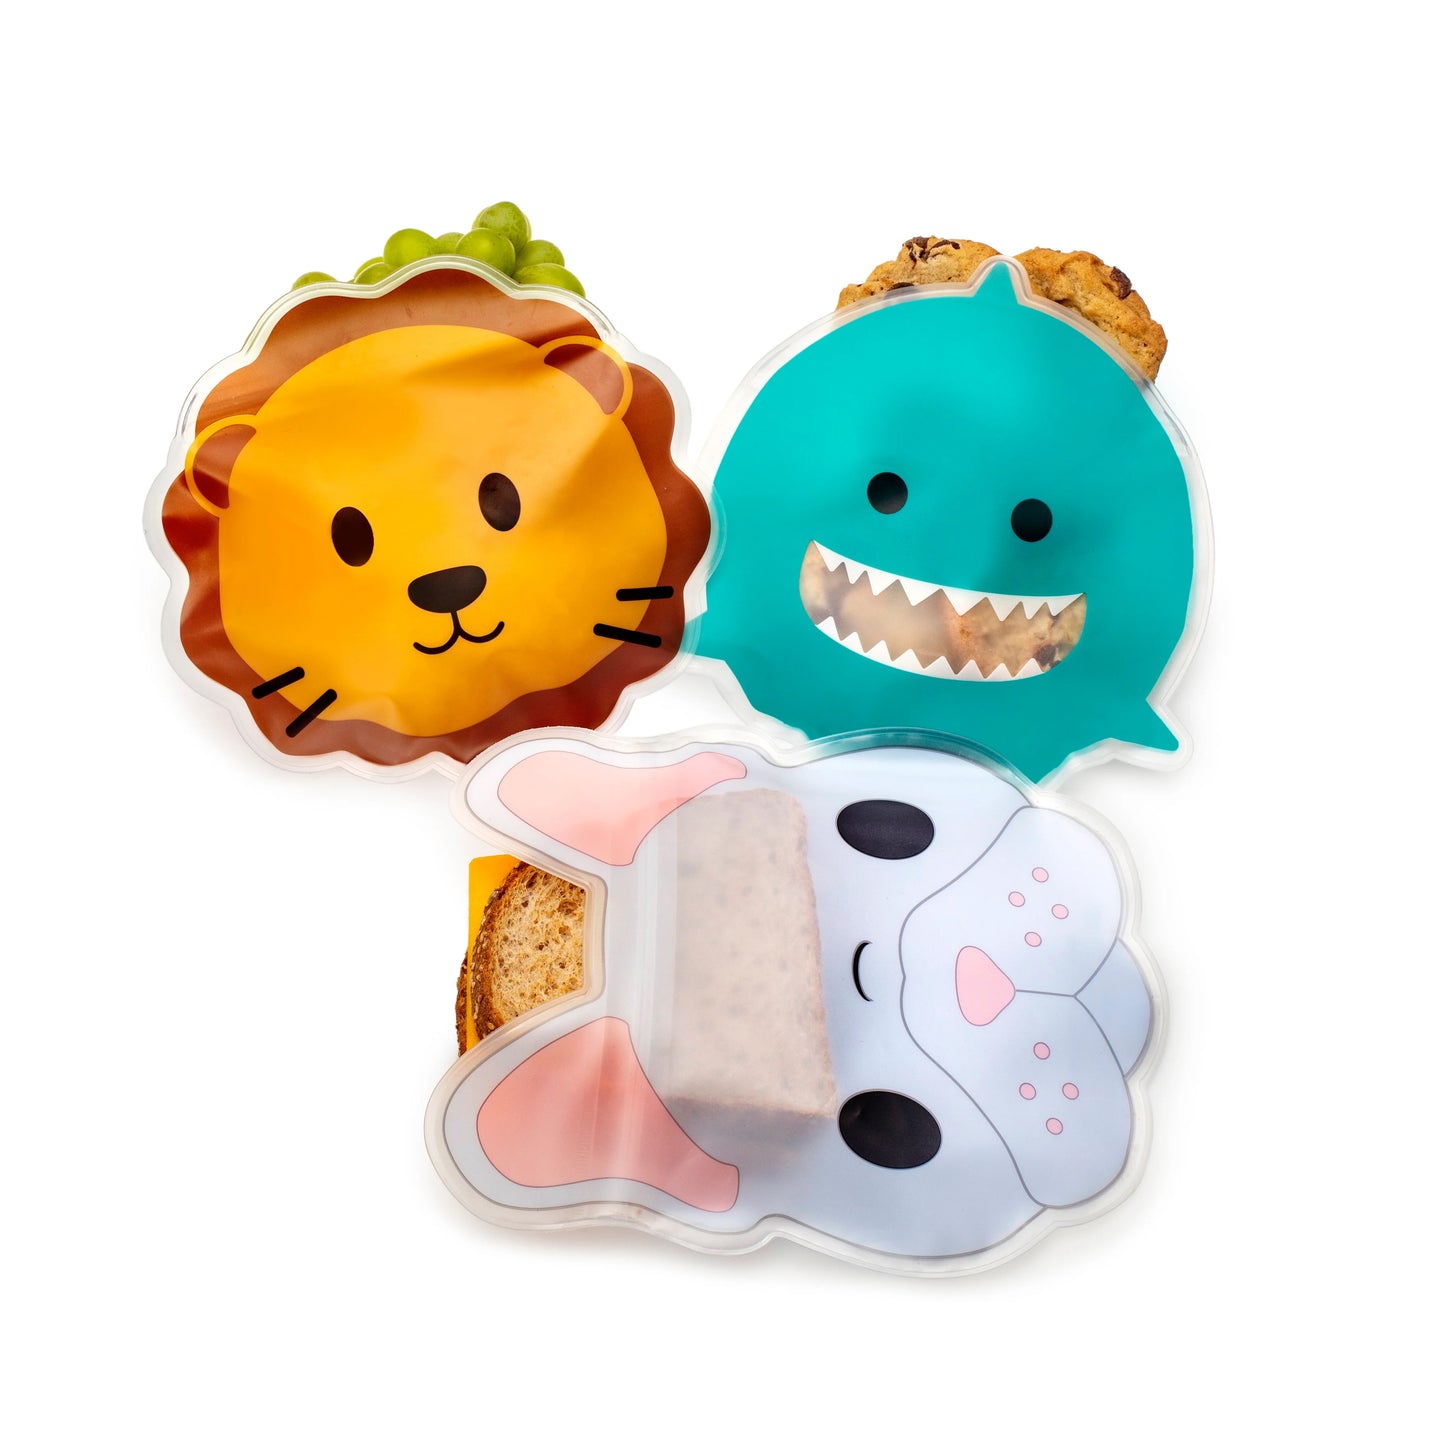 Melii Reusable Snack Bags - Set of 6 Adorable Animal Character Bags with Zip Leak-Proof Seal - Eco-Friendly, BPA-Free, Washable, and Perfect for On-the-Go Snacking